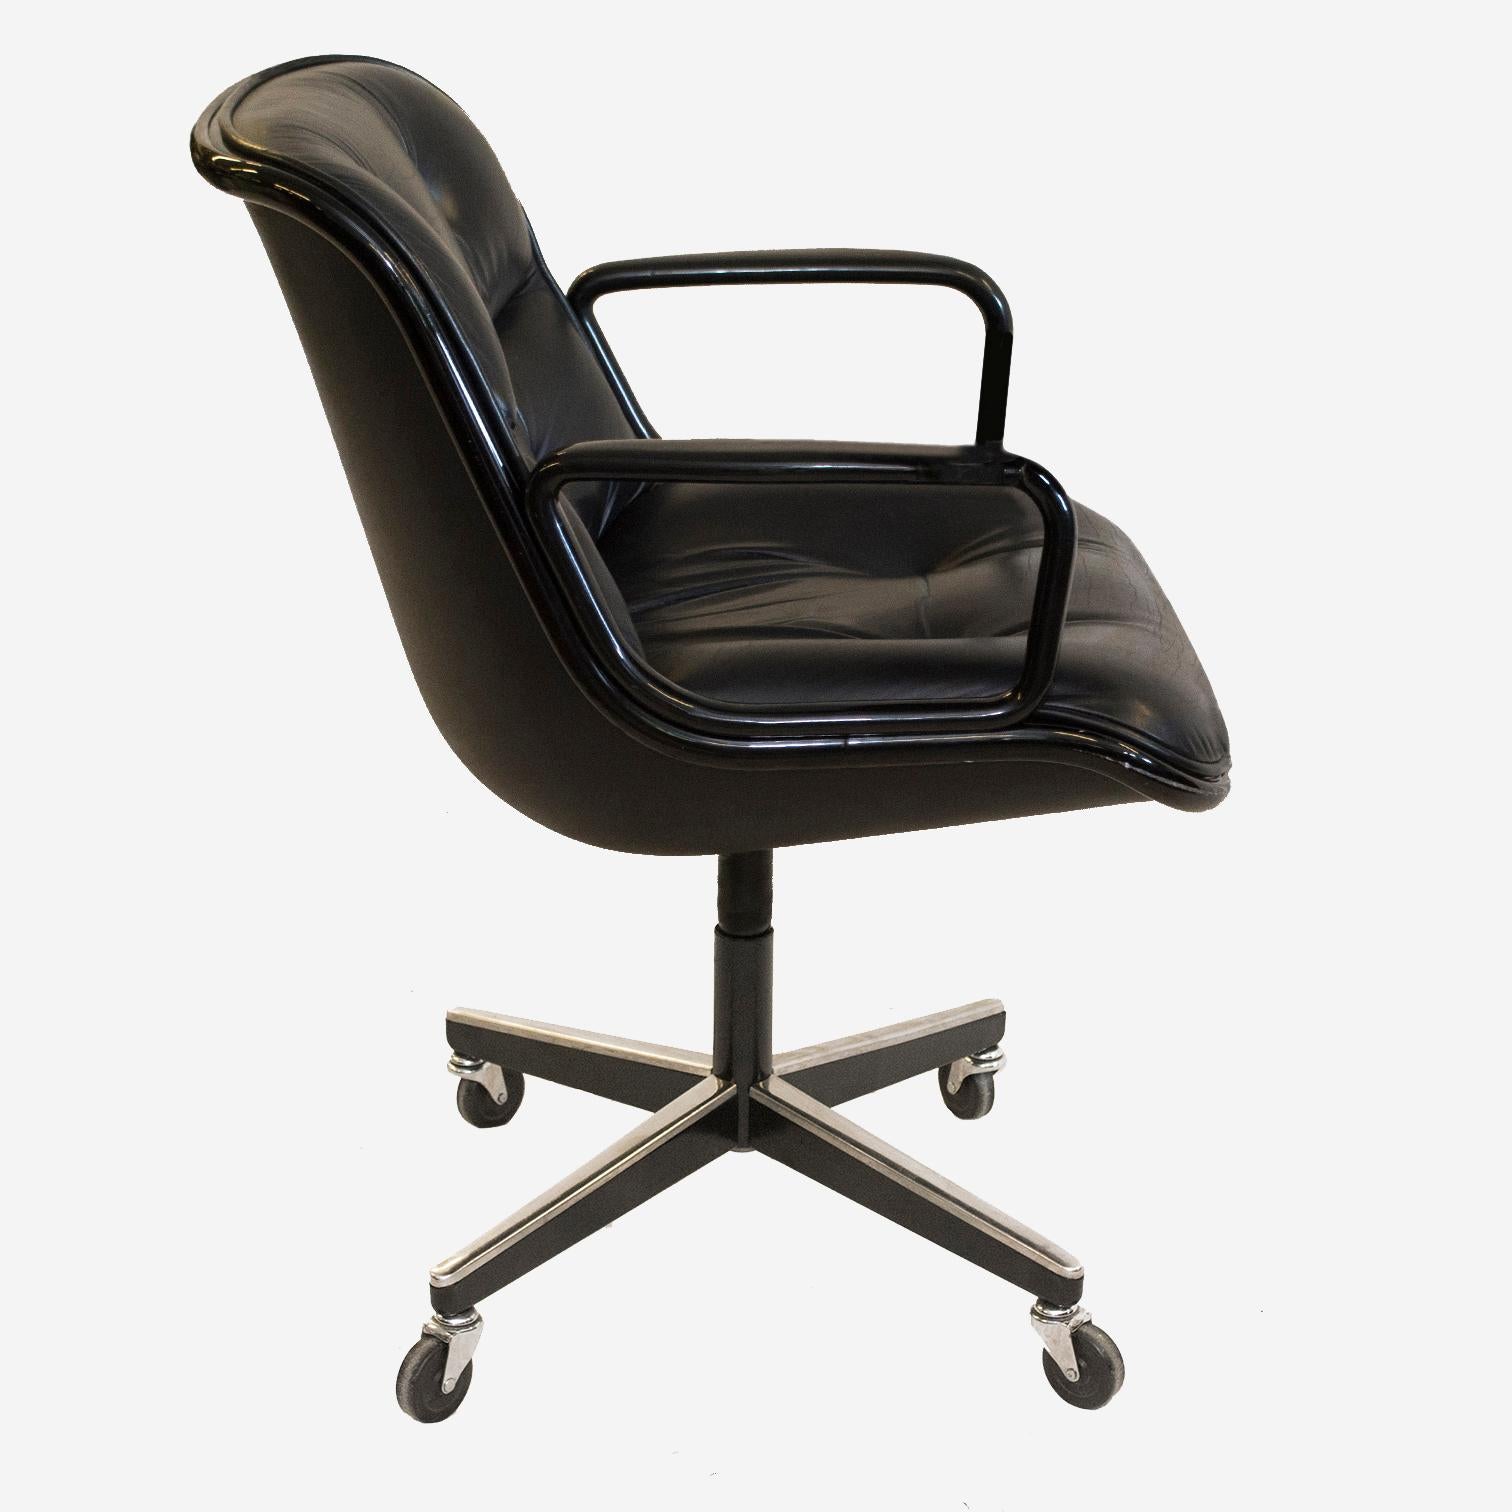 Mid-Century Modern Knoll Pollock Executive Chair reupholstered in Italian Leather, Matte Black